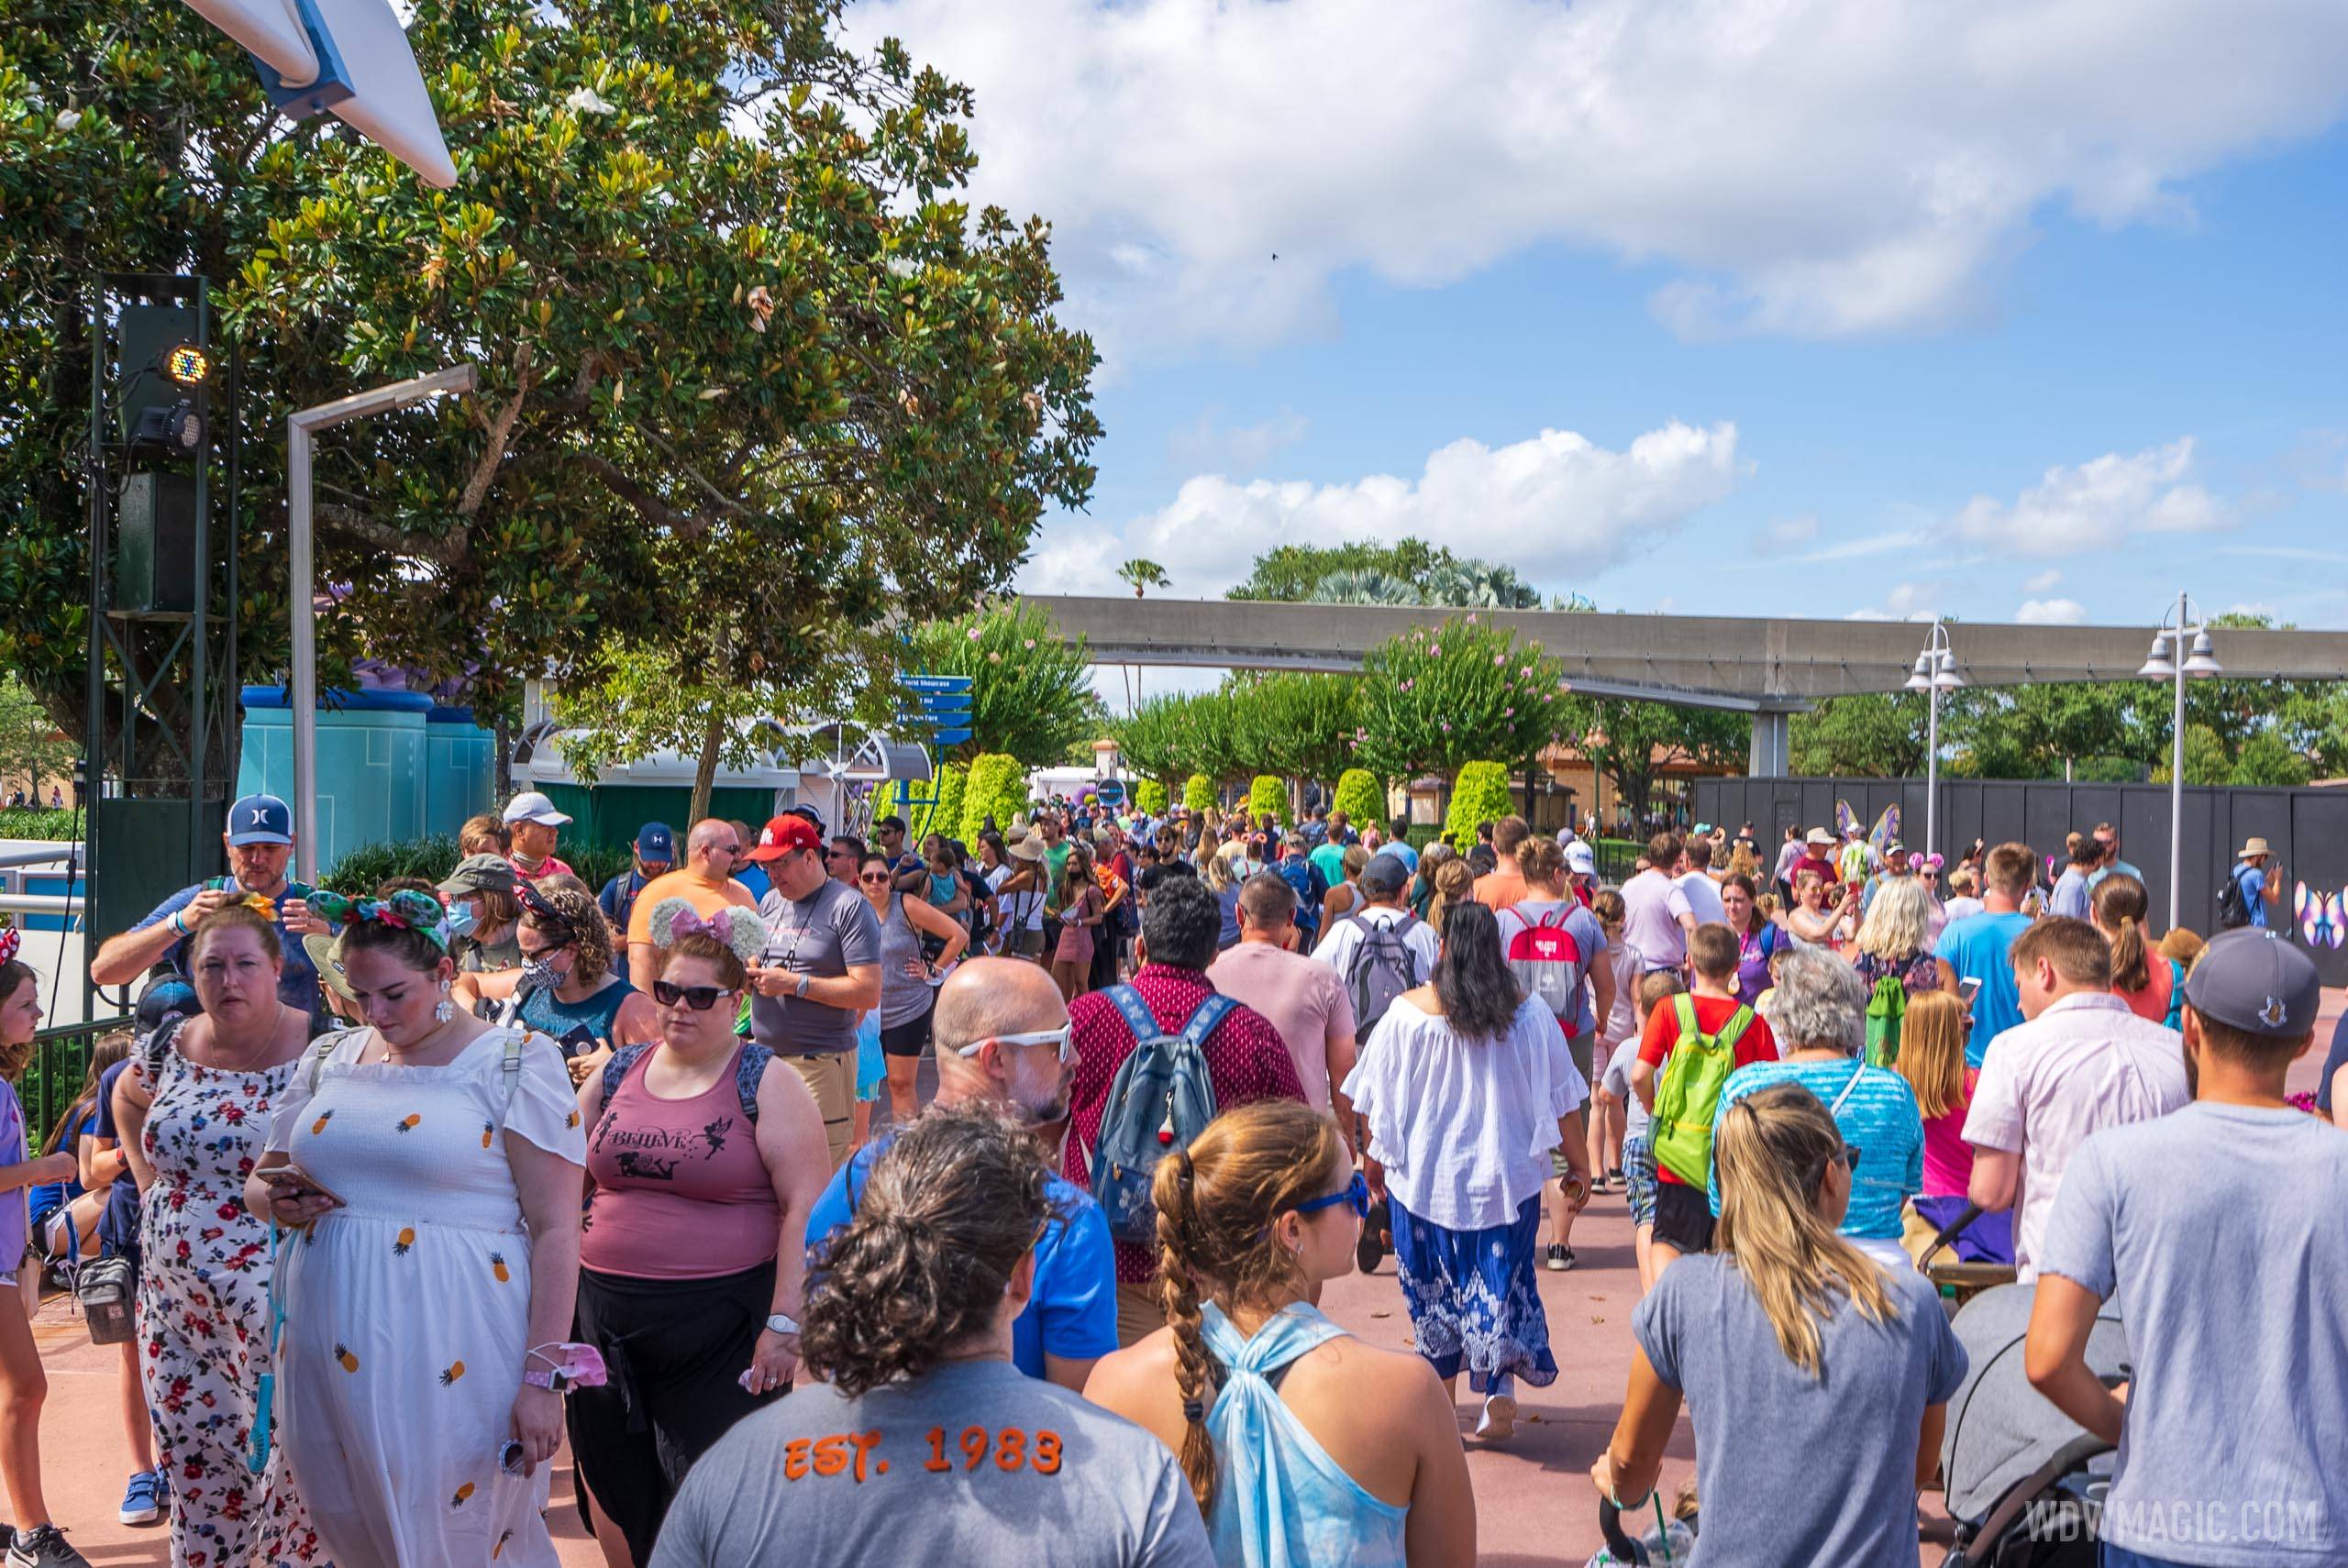 Guests entering a 1.5 hour wait for Test Track at rope-drop